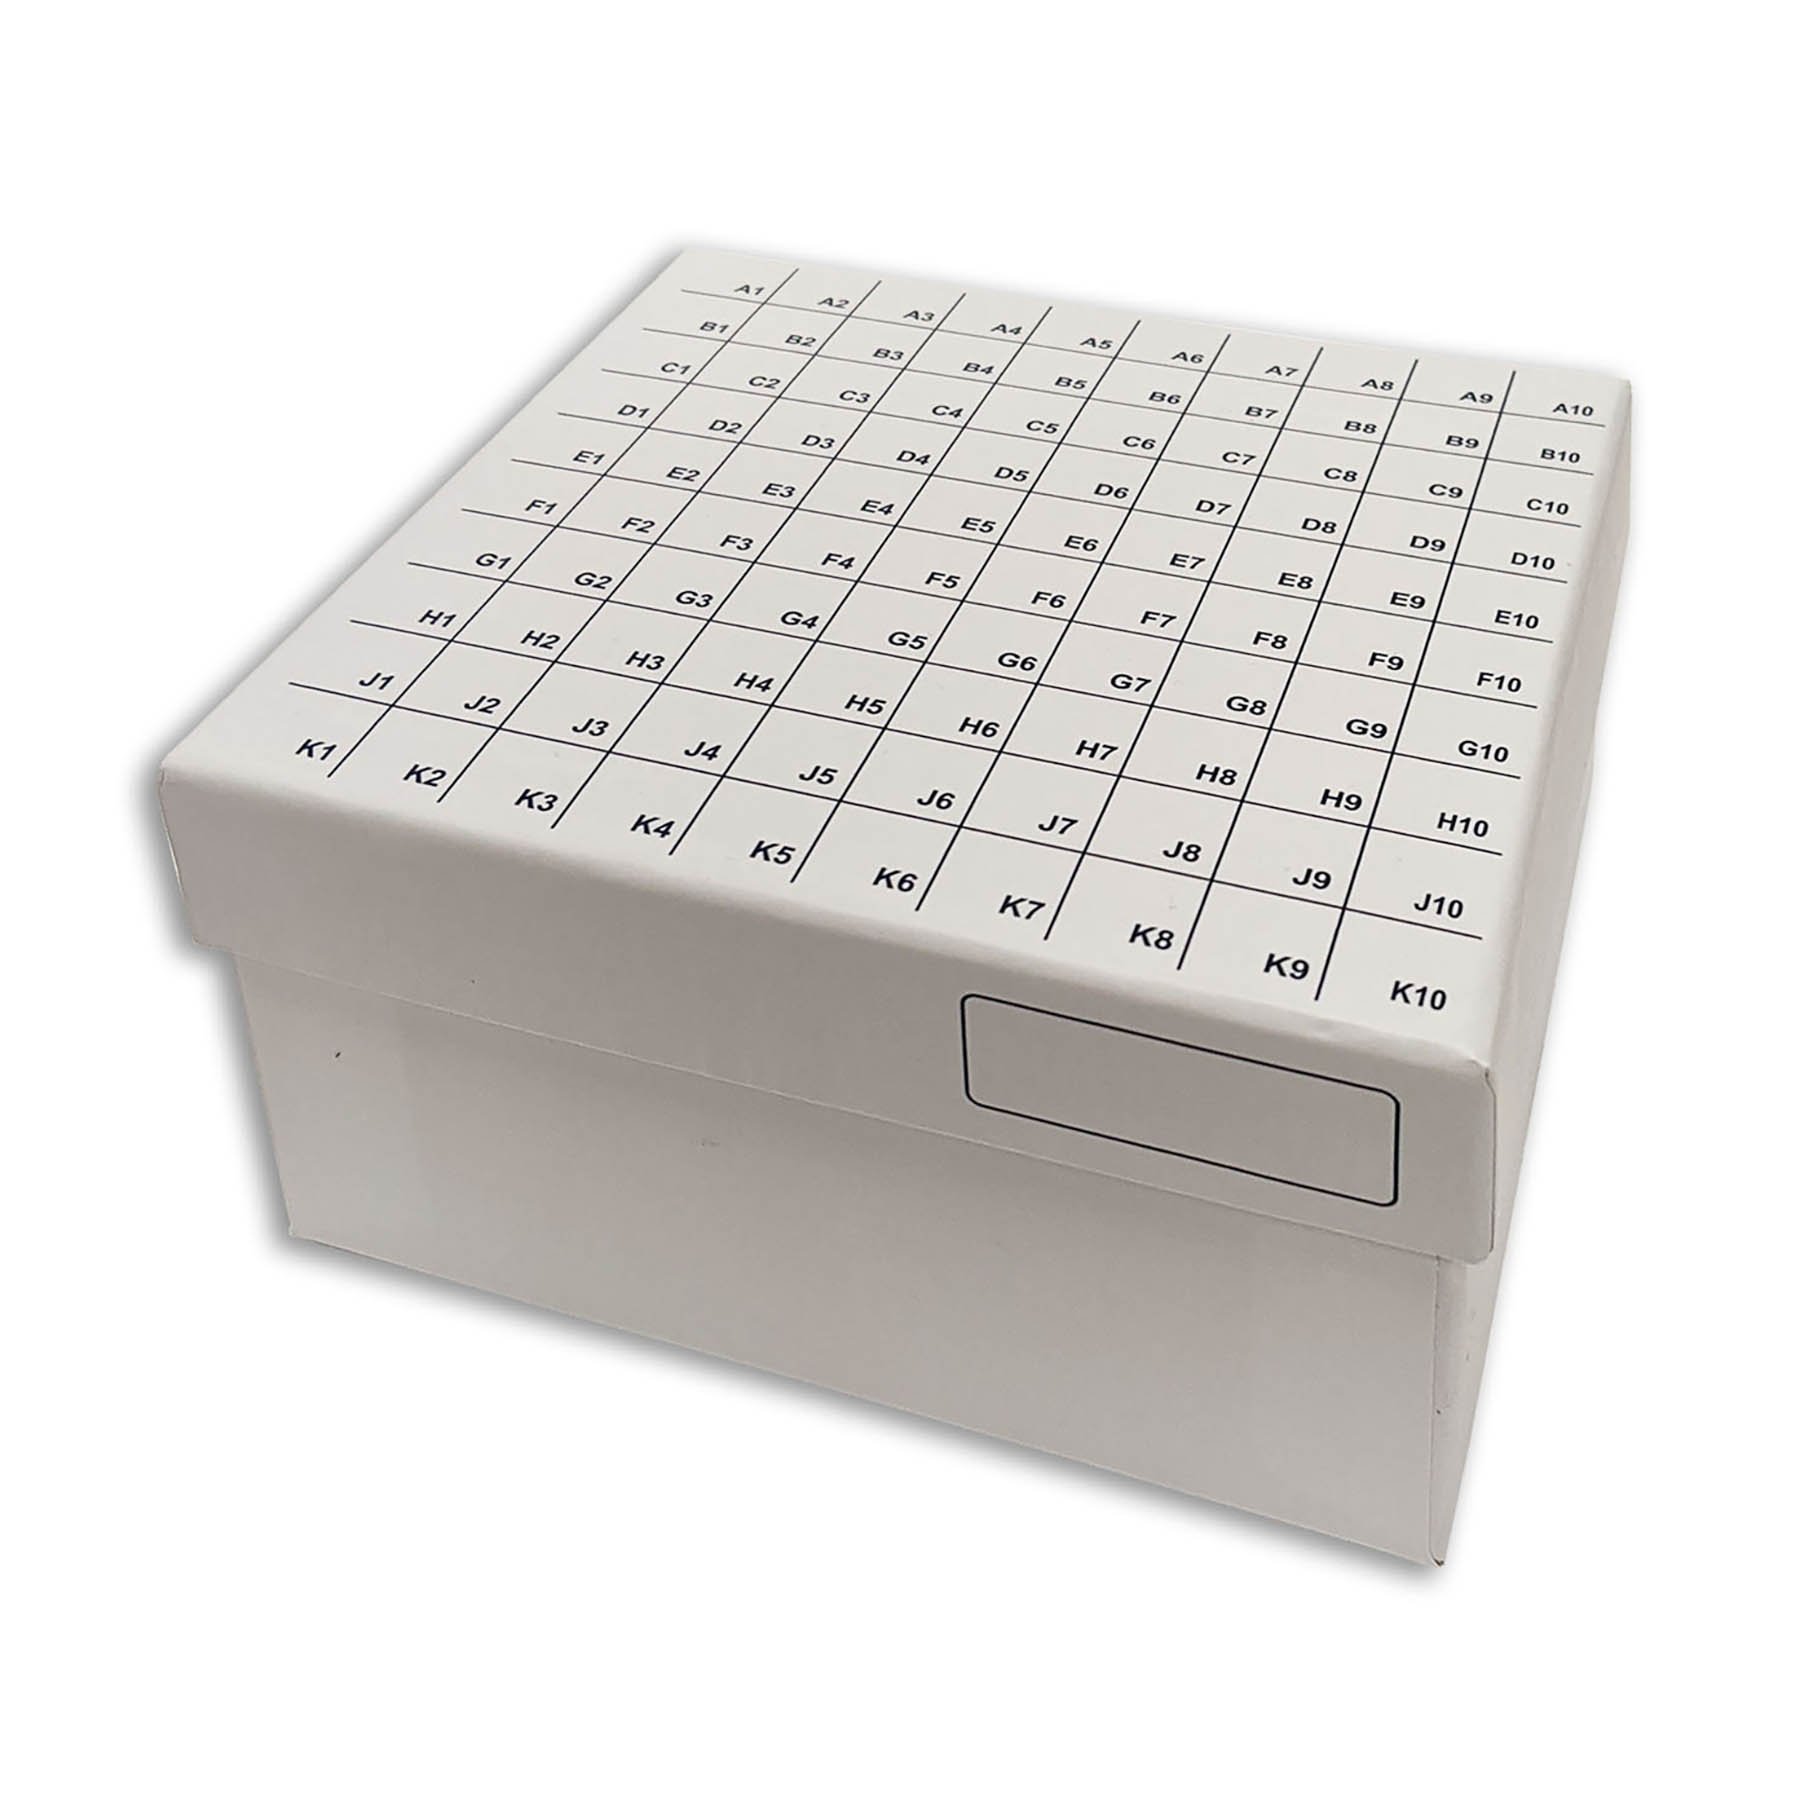 https://www.universalmedicalinc.com/media/catalog/product/cache/db2290e14b239ecd227b001e50a6dc1b/r/3/r3700_3-inch-fliptop-cardboard-freezer-box-100-place-with-attached-hinged-lid-white.jpg